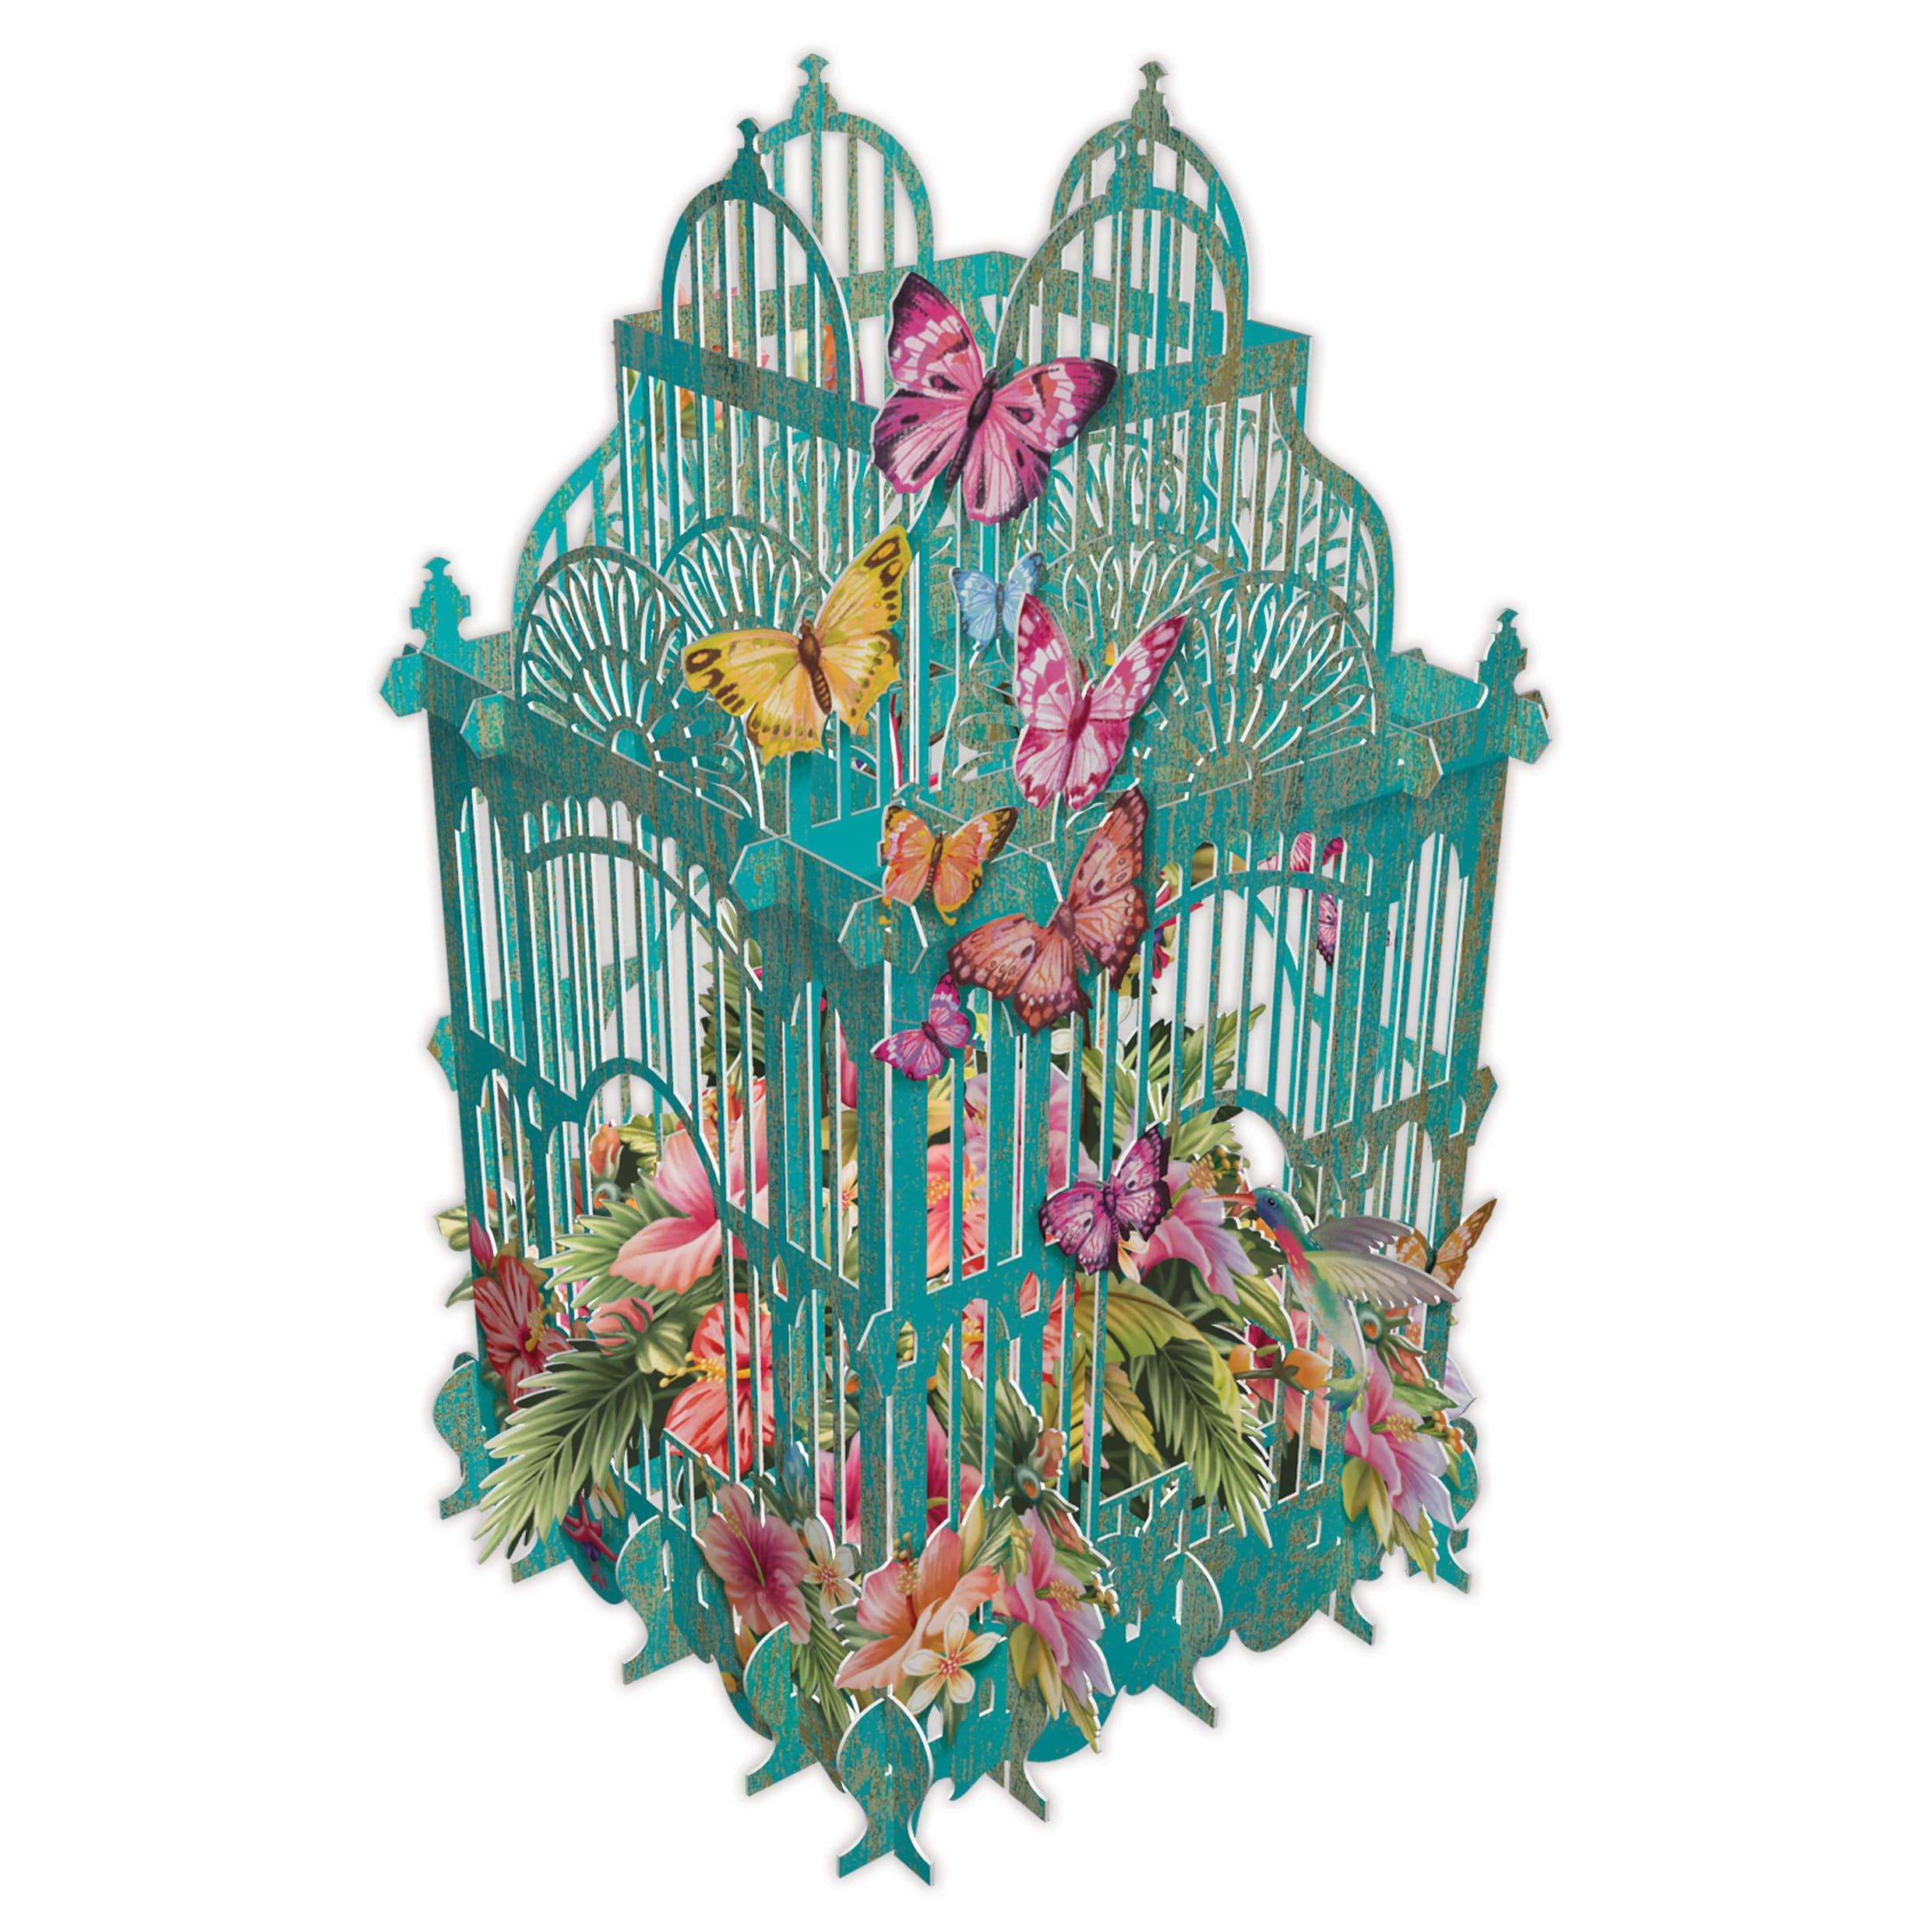 Tropical Cage 3D Pop Up Card